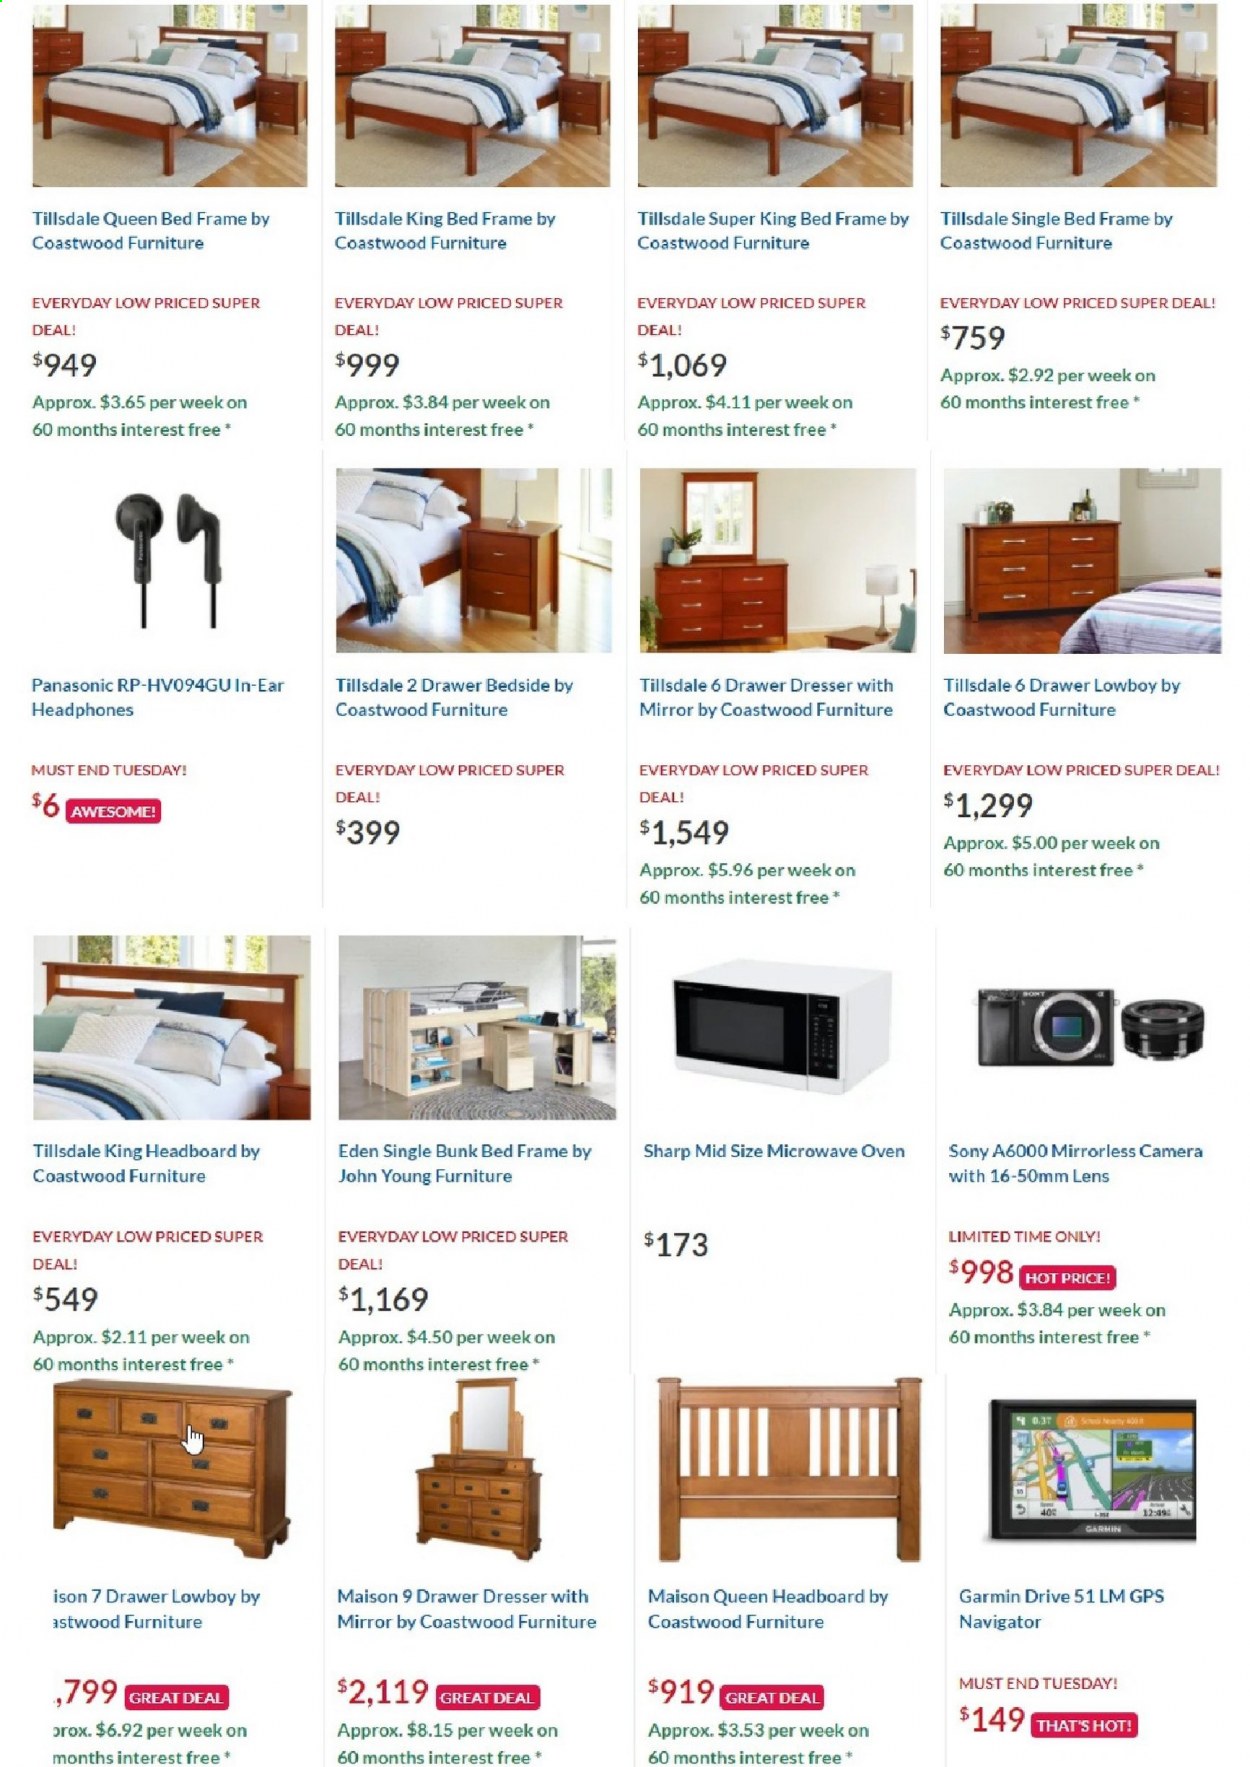 thumbnail - Harvey Norman mailer - Sales products - king bed, queen bed, single bed, bed, headboard, bed frame, dresser, mirror, Sony, Panasonic, Garmin, camera, mirrorless camera, lens, Sharp, headphones, oven, microwave. Page 3.